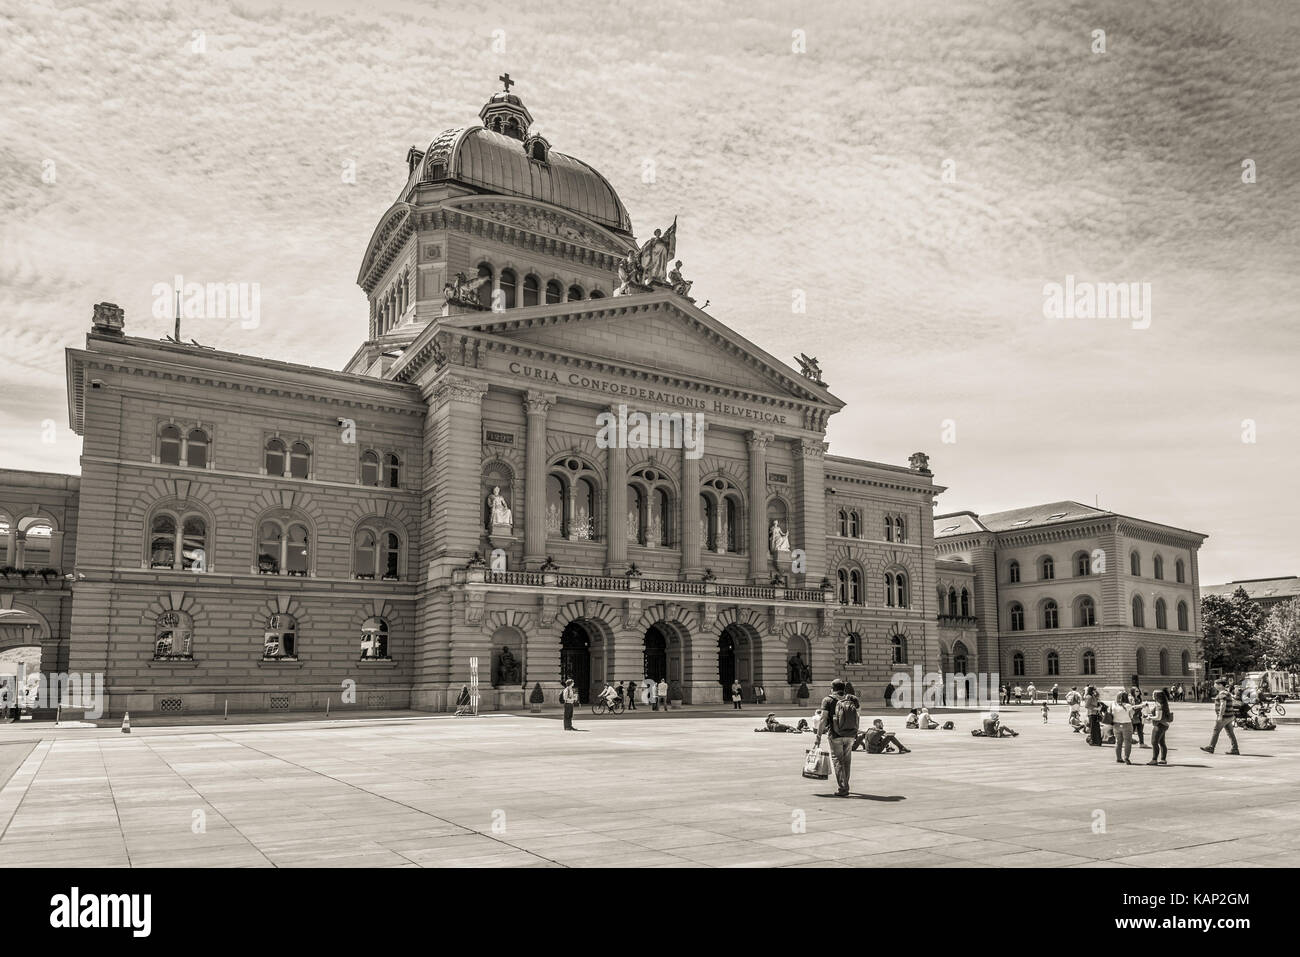 Bern, Switzerland - May 26, 2016: People are resting on the square in front of the Swiss Parliament Building (Bundesplatz) in Bern, Switzerland. Sepia Stock Photo